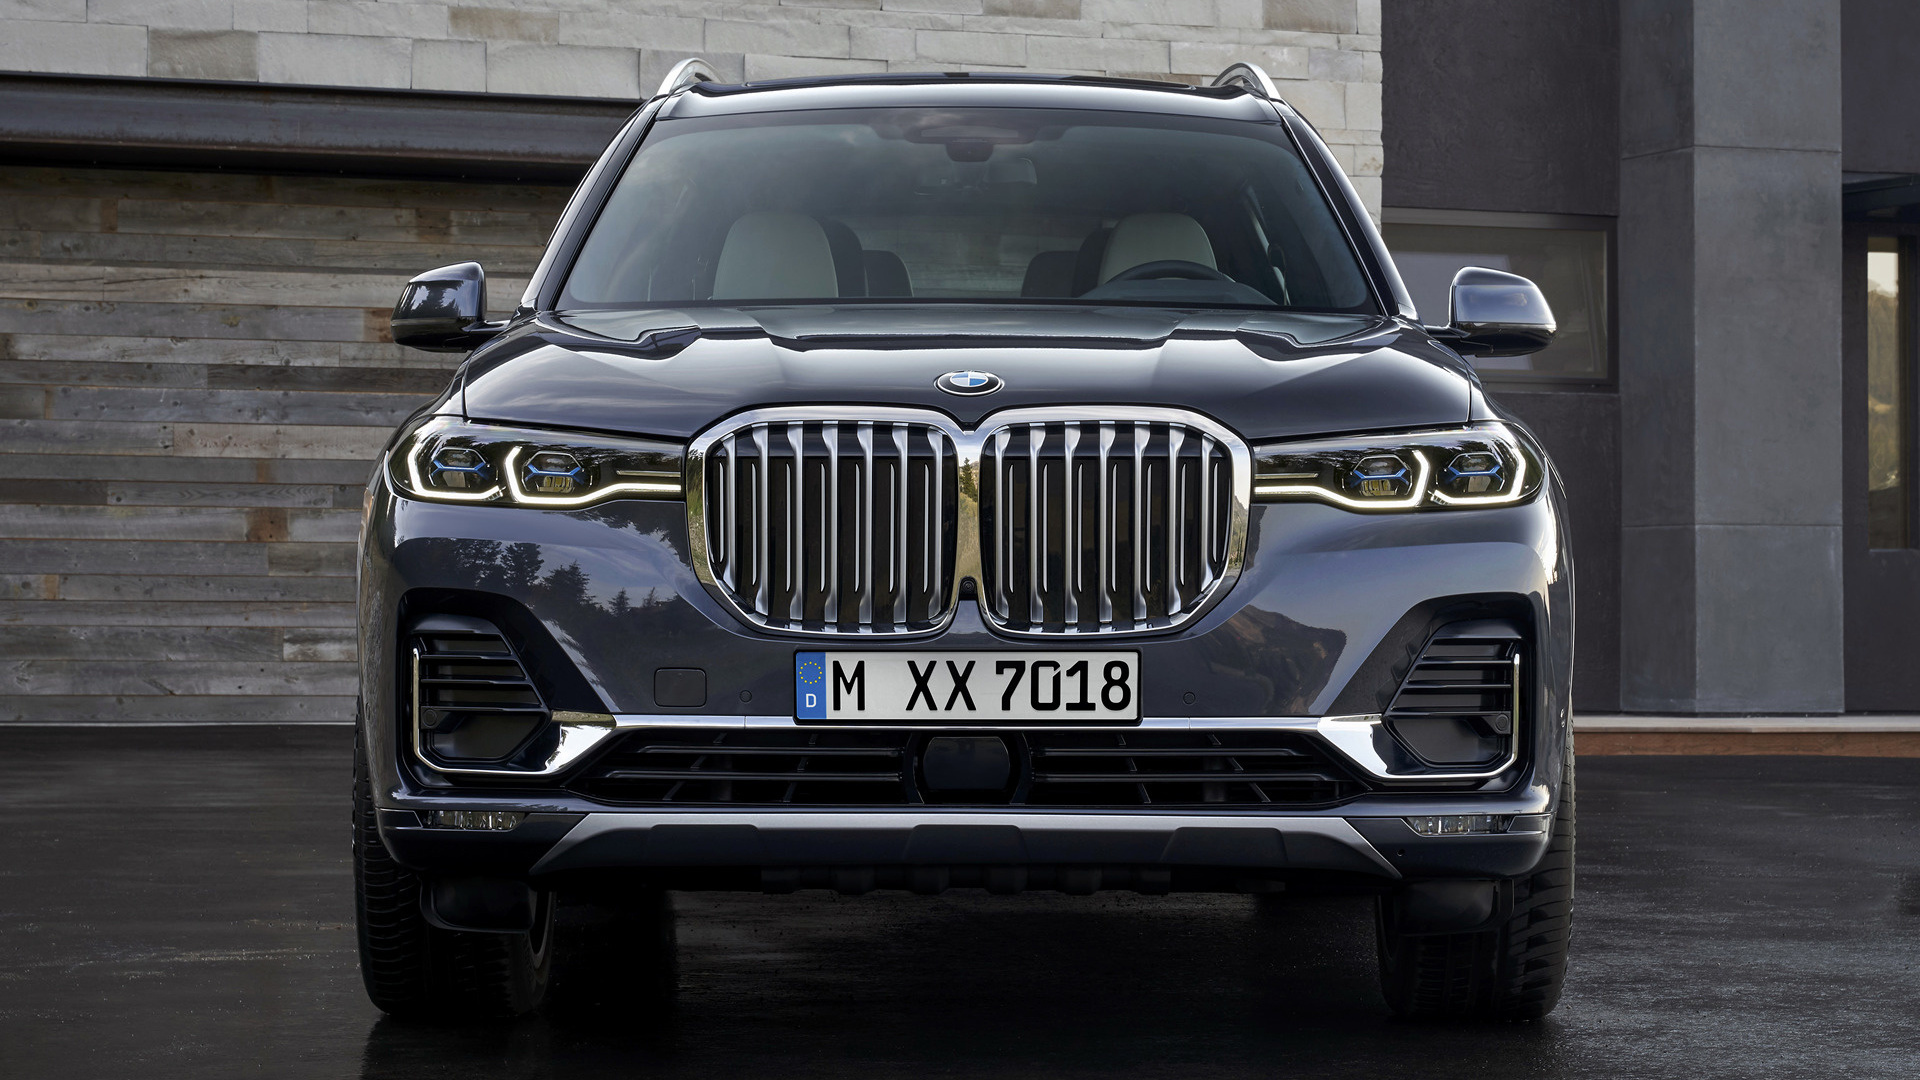 2019 BMW X7 - Wallpapers and HD Images | Car Pixel1920 x 1080